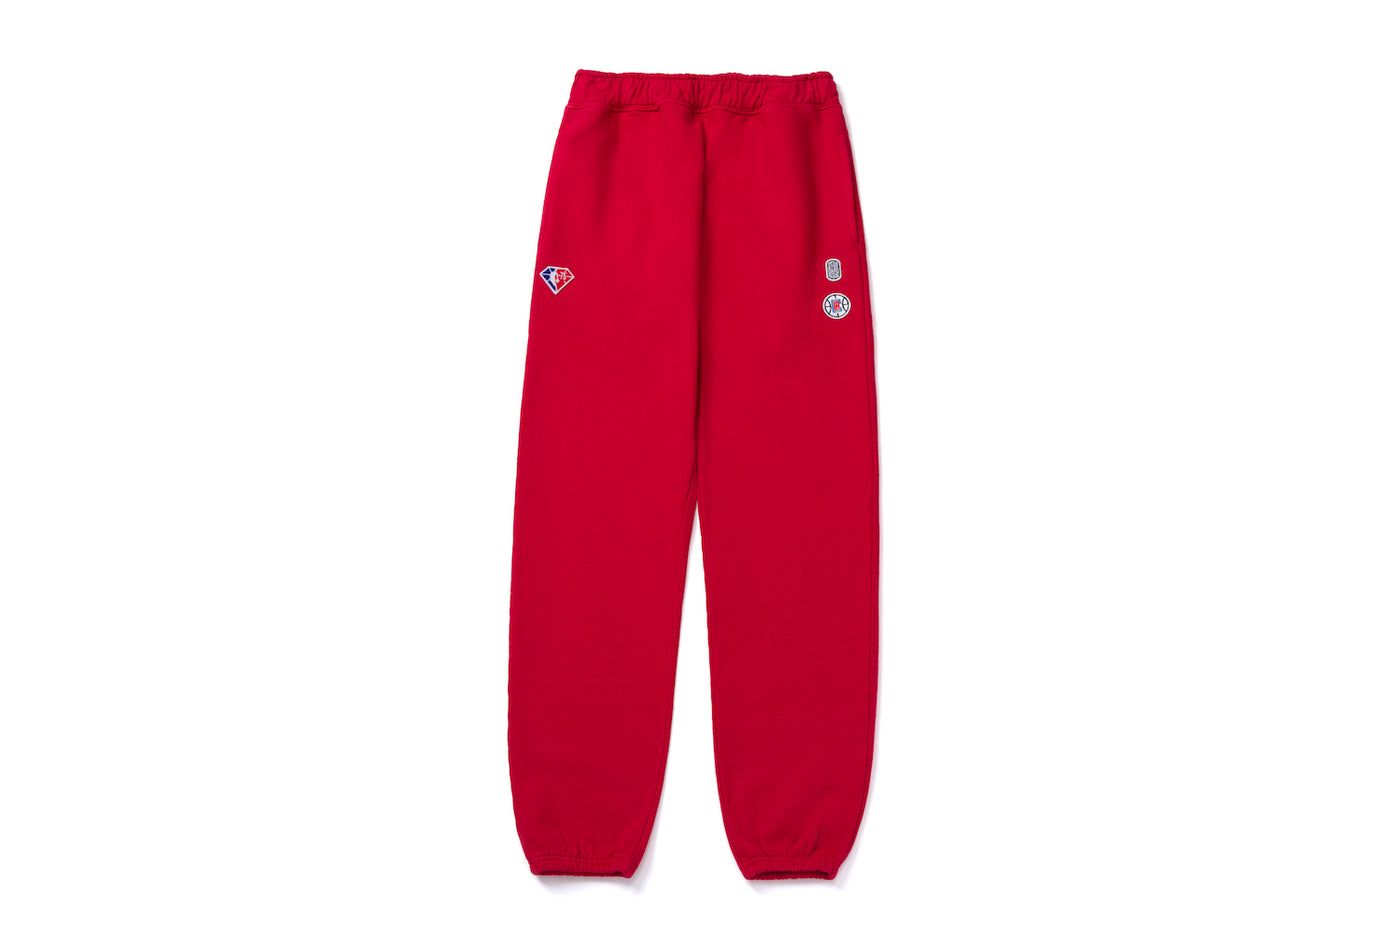 Clippers Sweatpants